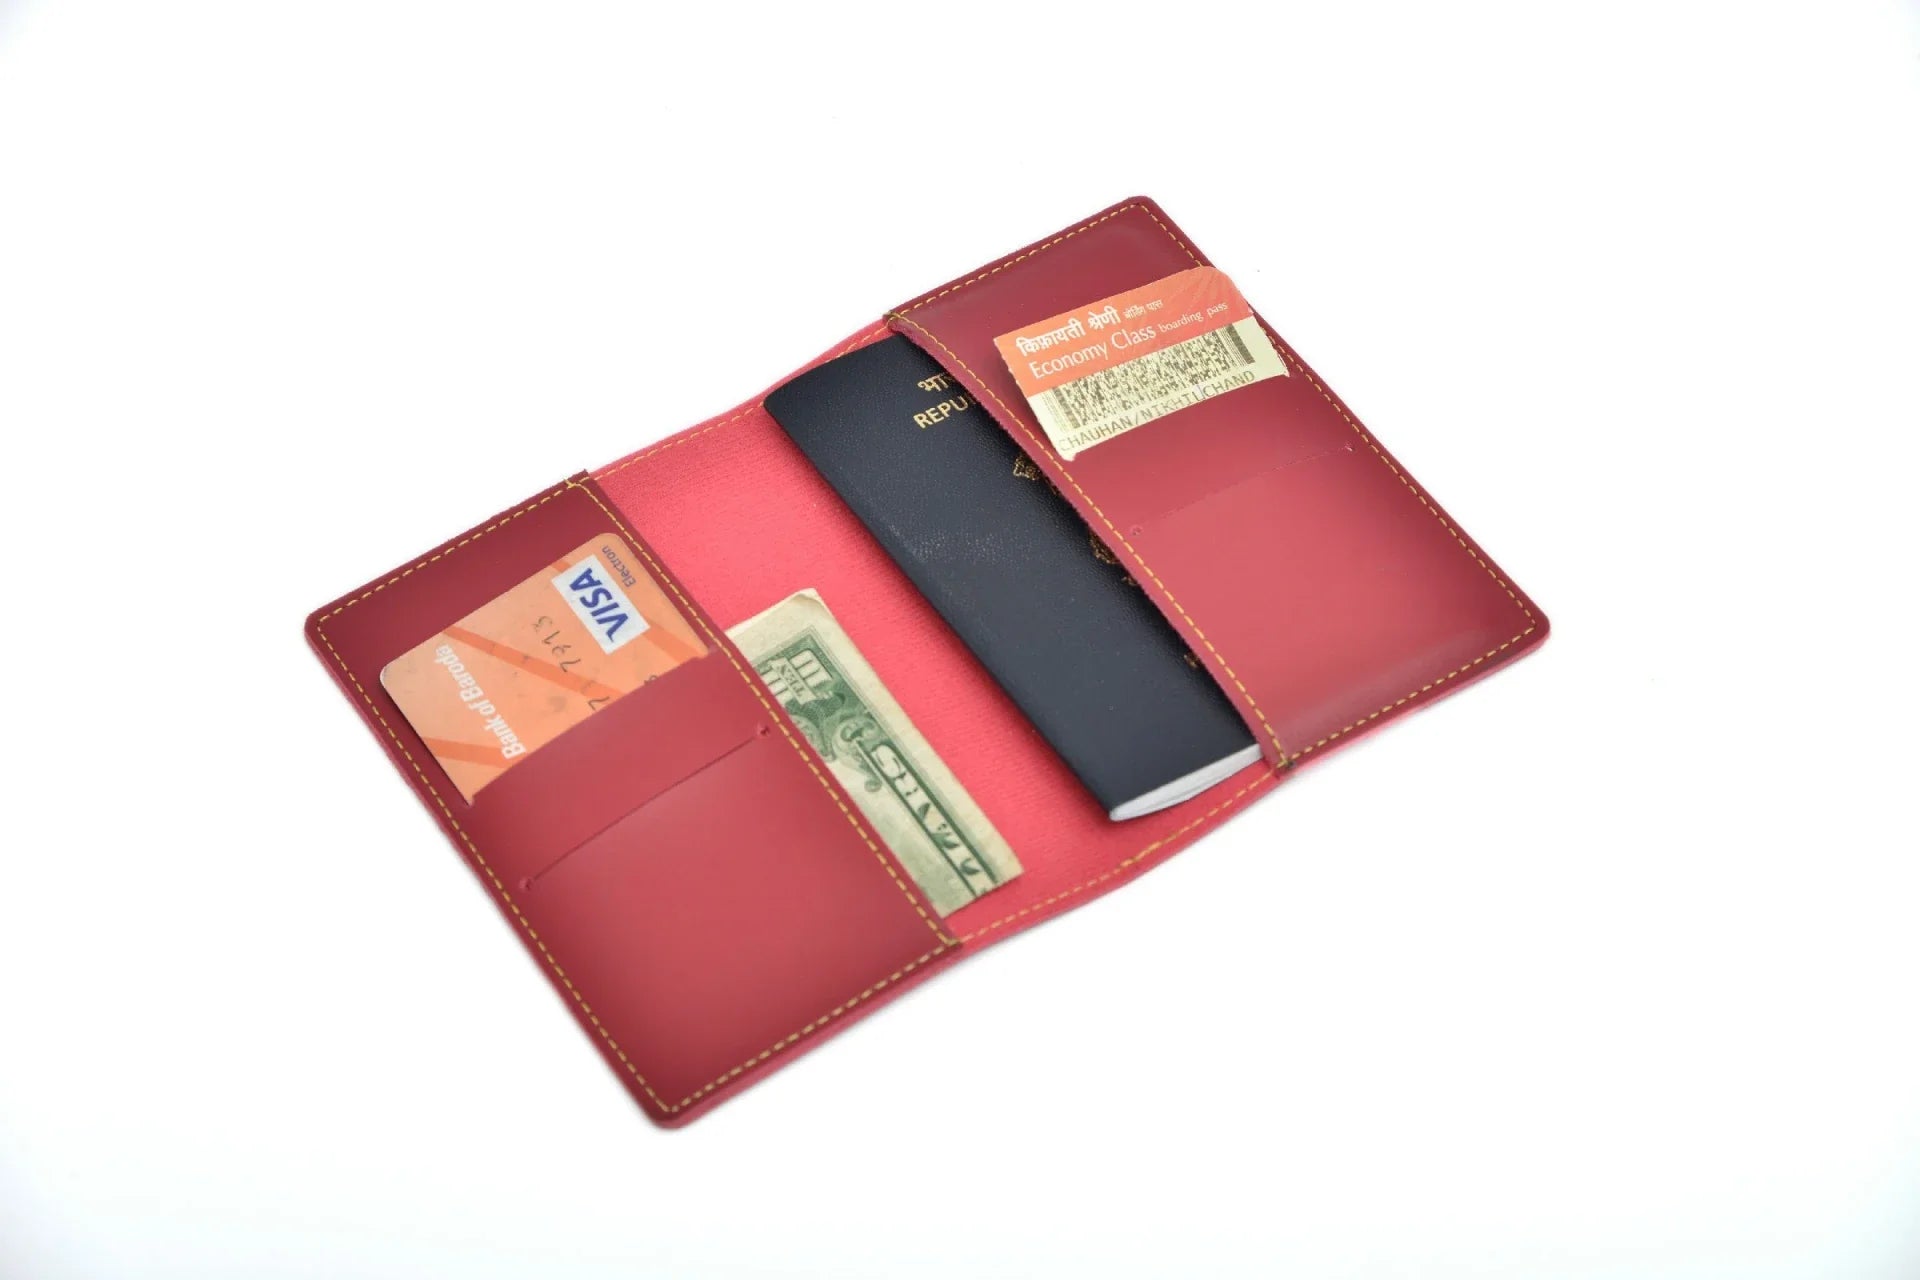 Inside or open view of wine passport cover